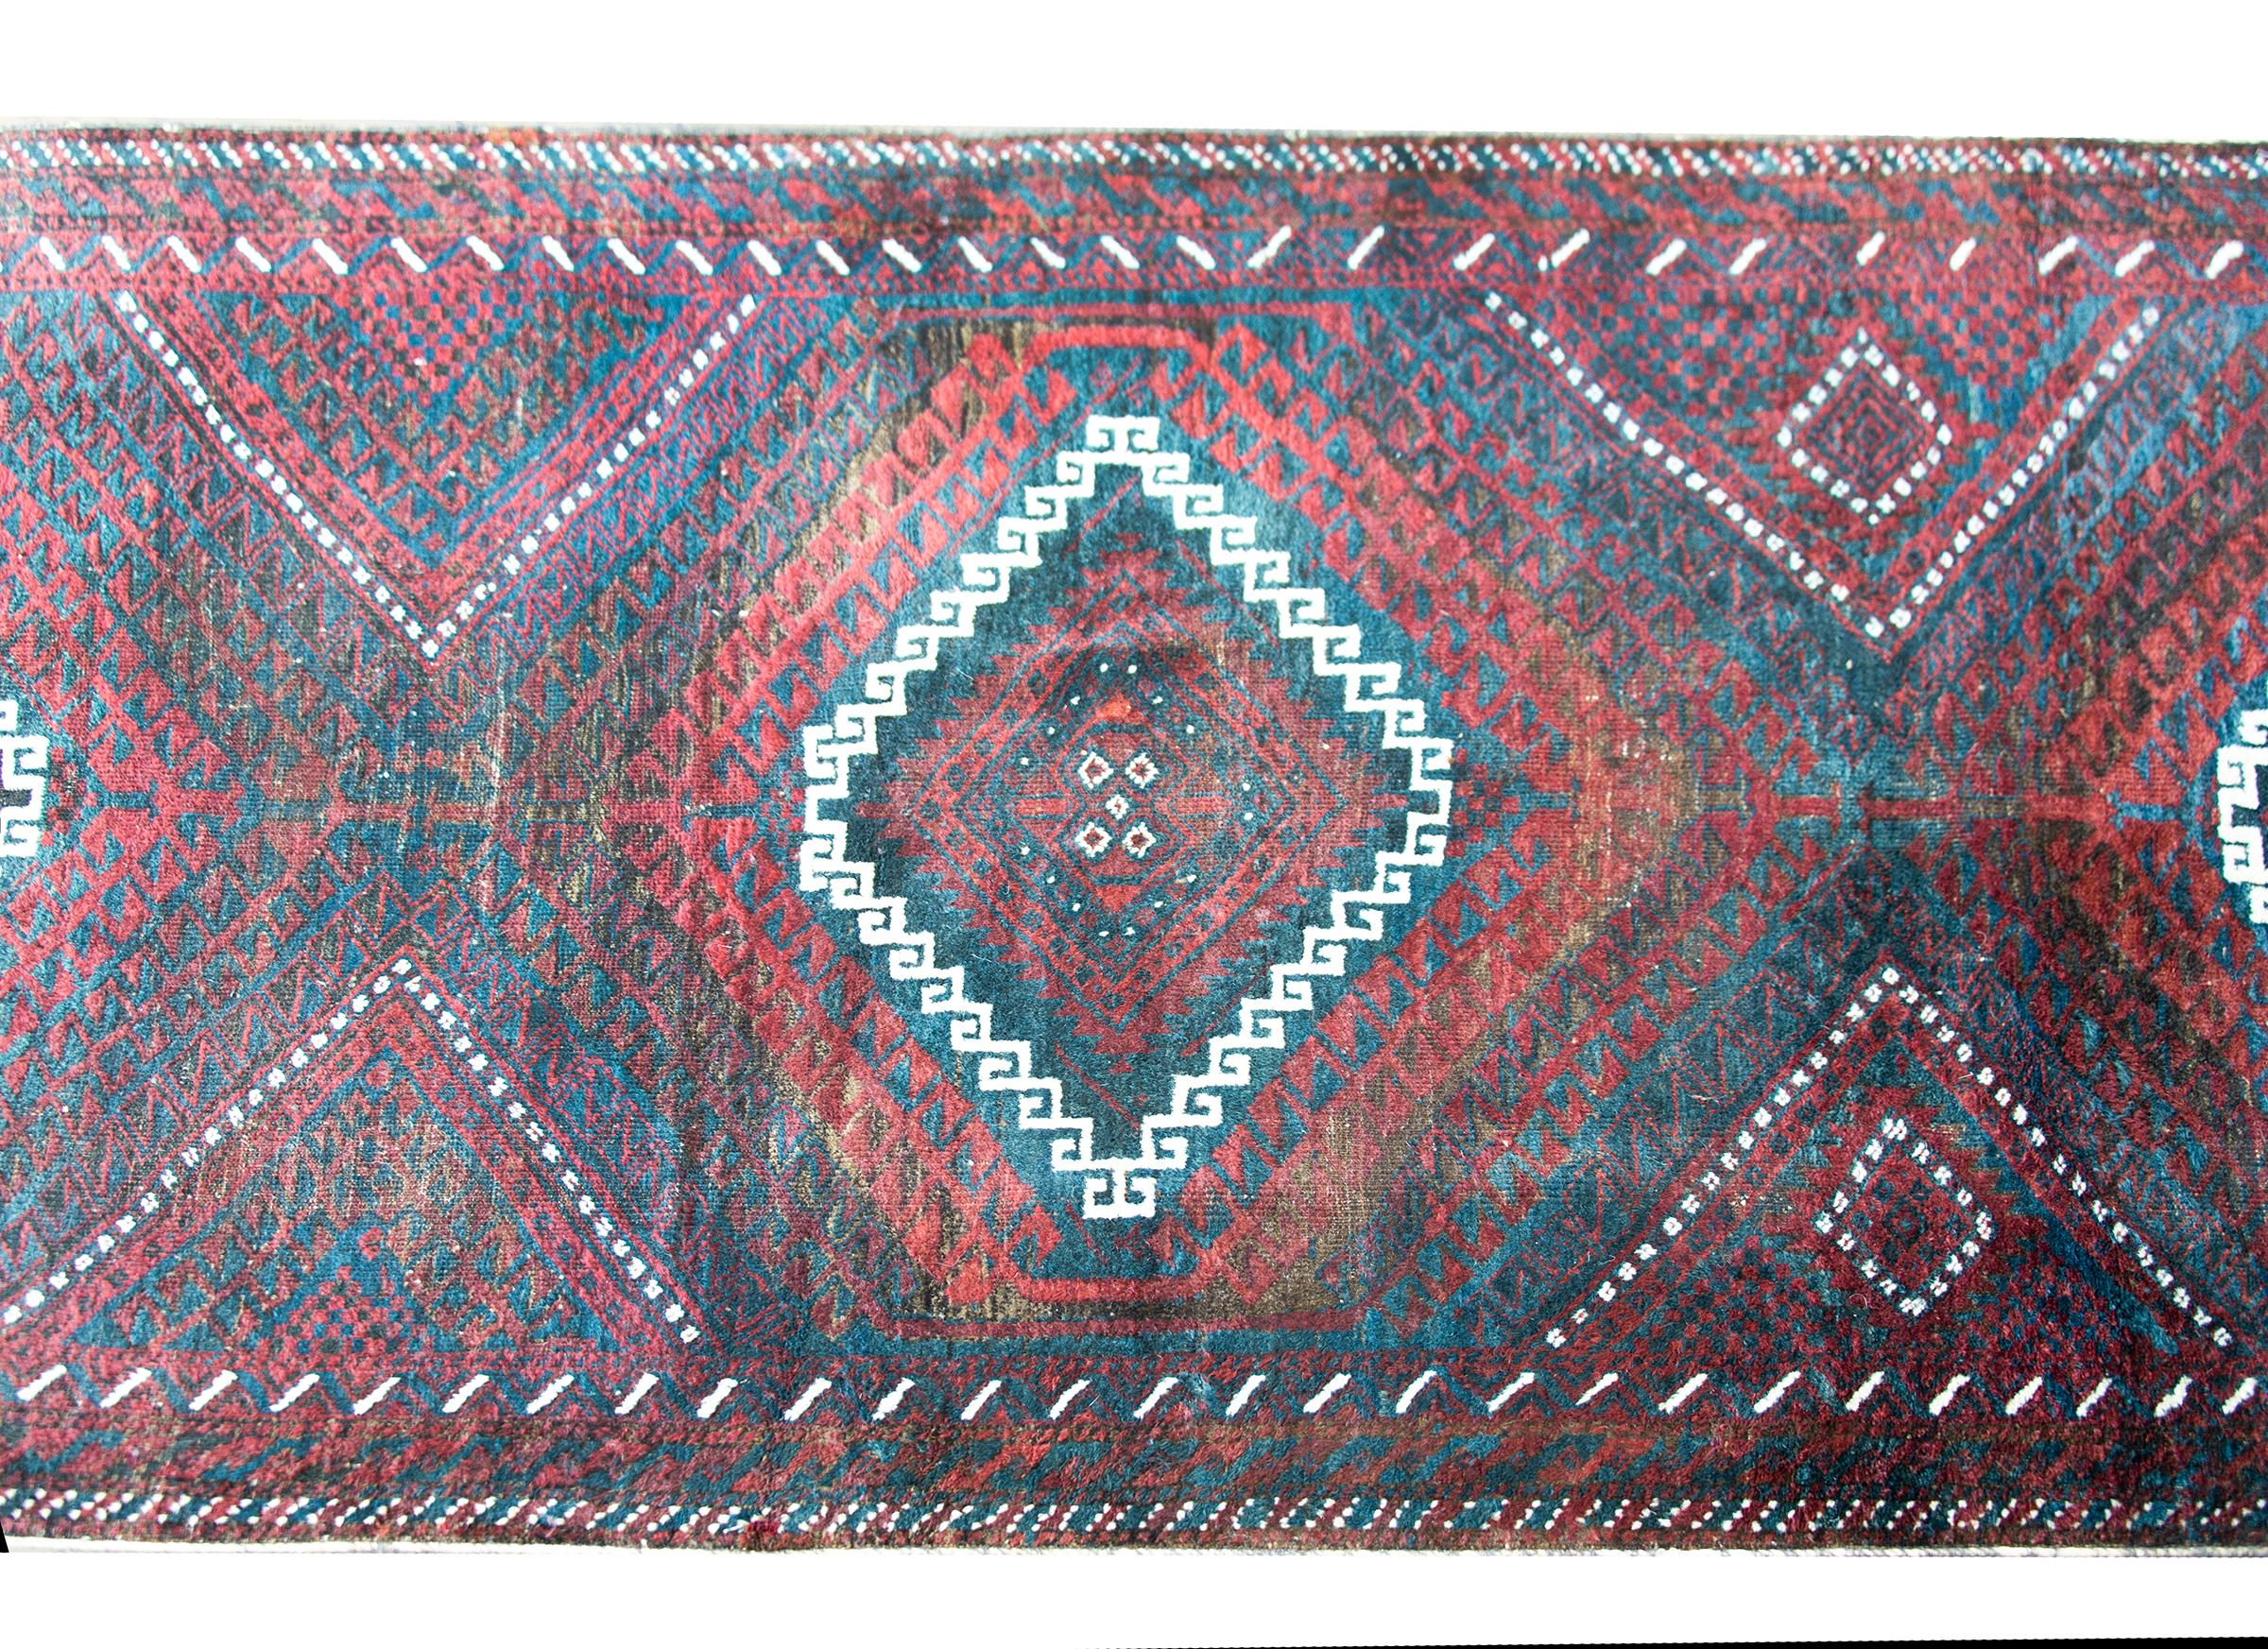 A wonderful vintage Afghani Baluchi runner with three large diamond medallions woven with repeated crimson and black stylized scrolling vine motif, and surrounded by a border with multiple petite floral patterned stripes woven in similar colors as